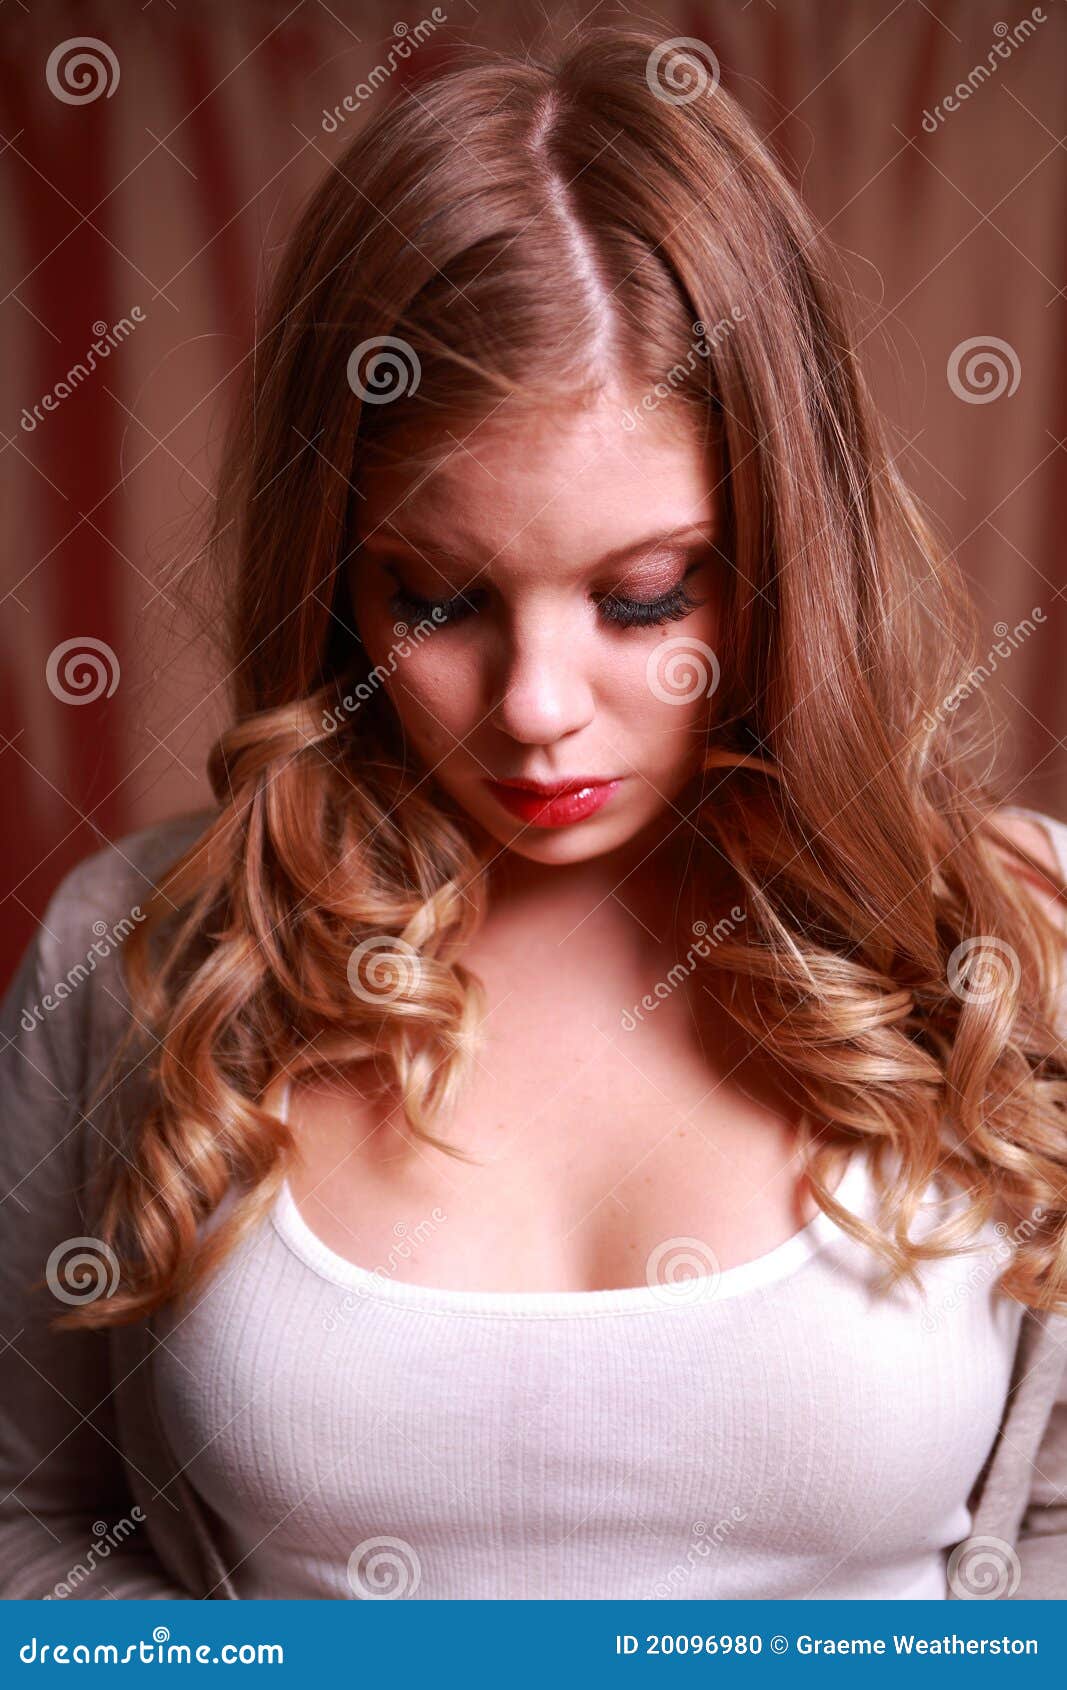 A Shy Young Lady Stock Photo Image 20096980